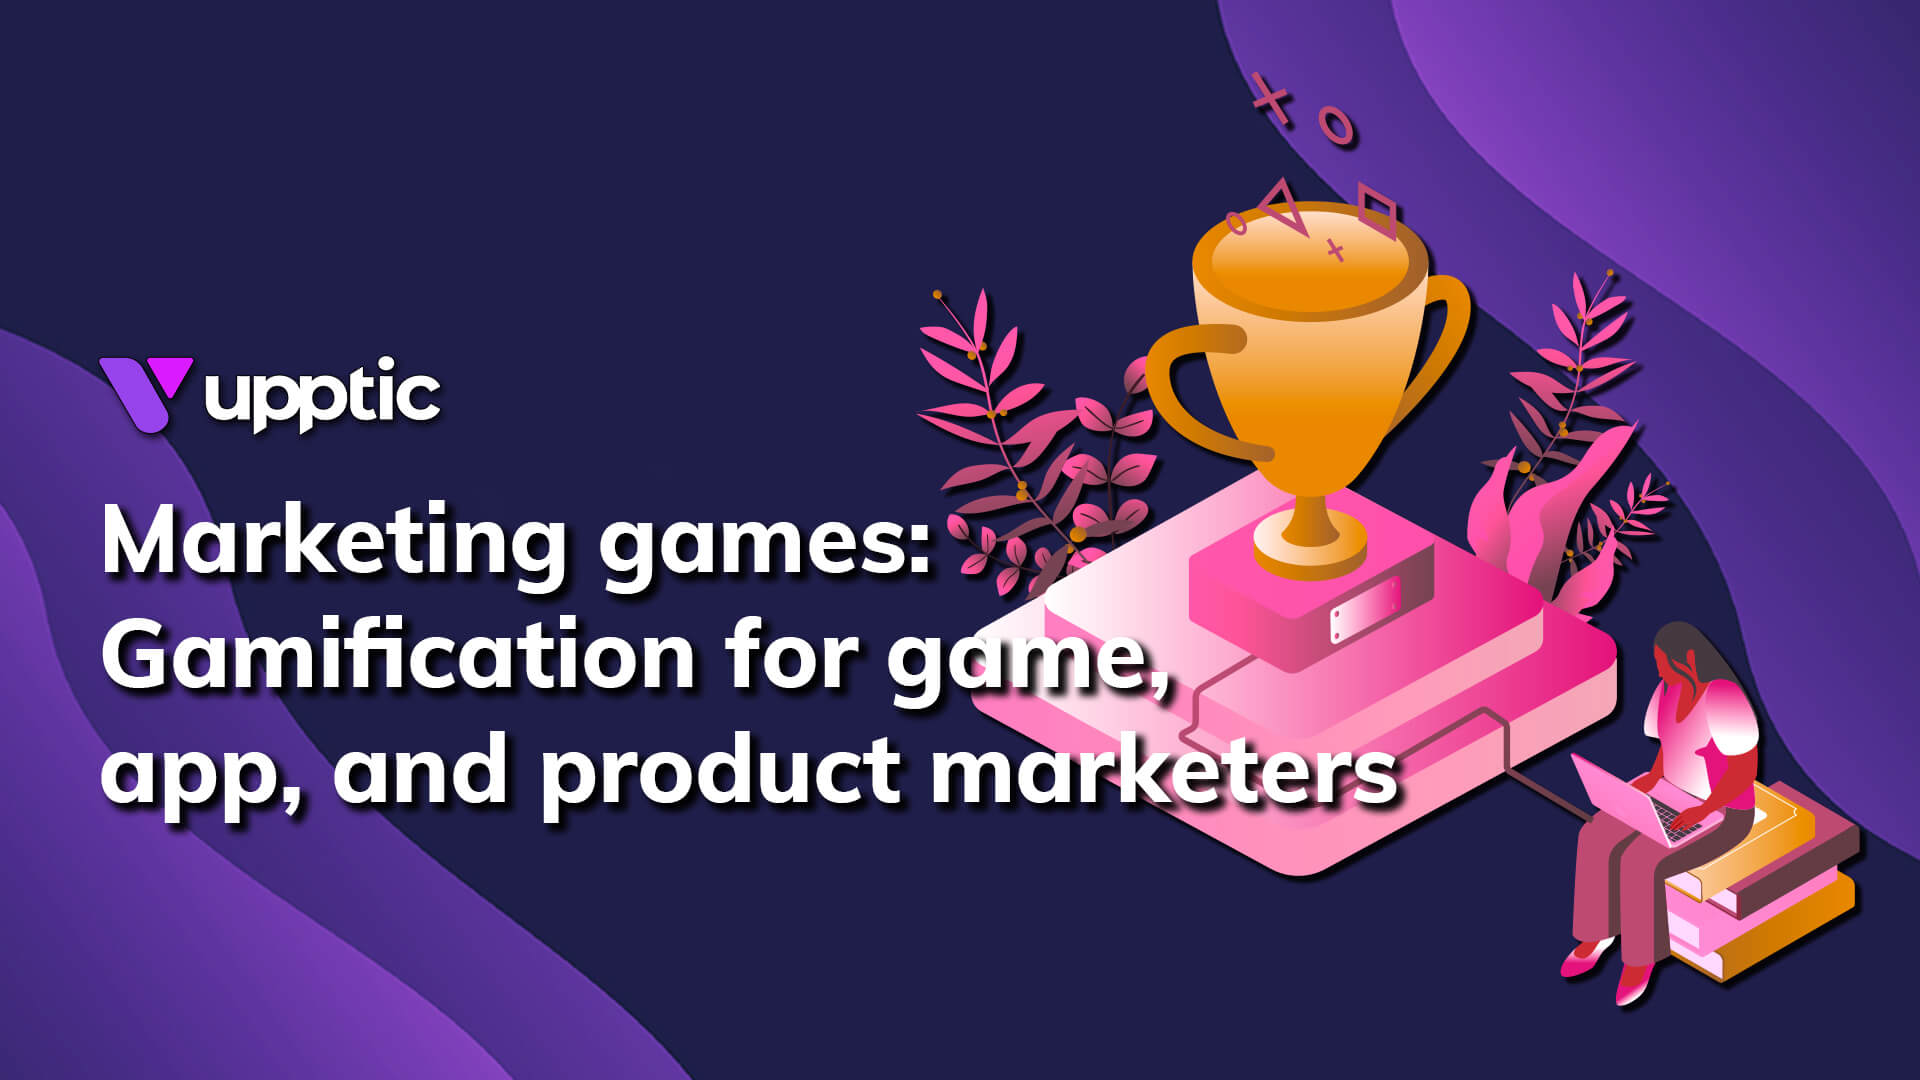 Upptic's guide to marketing games – gamification for game, app, and product marketers